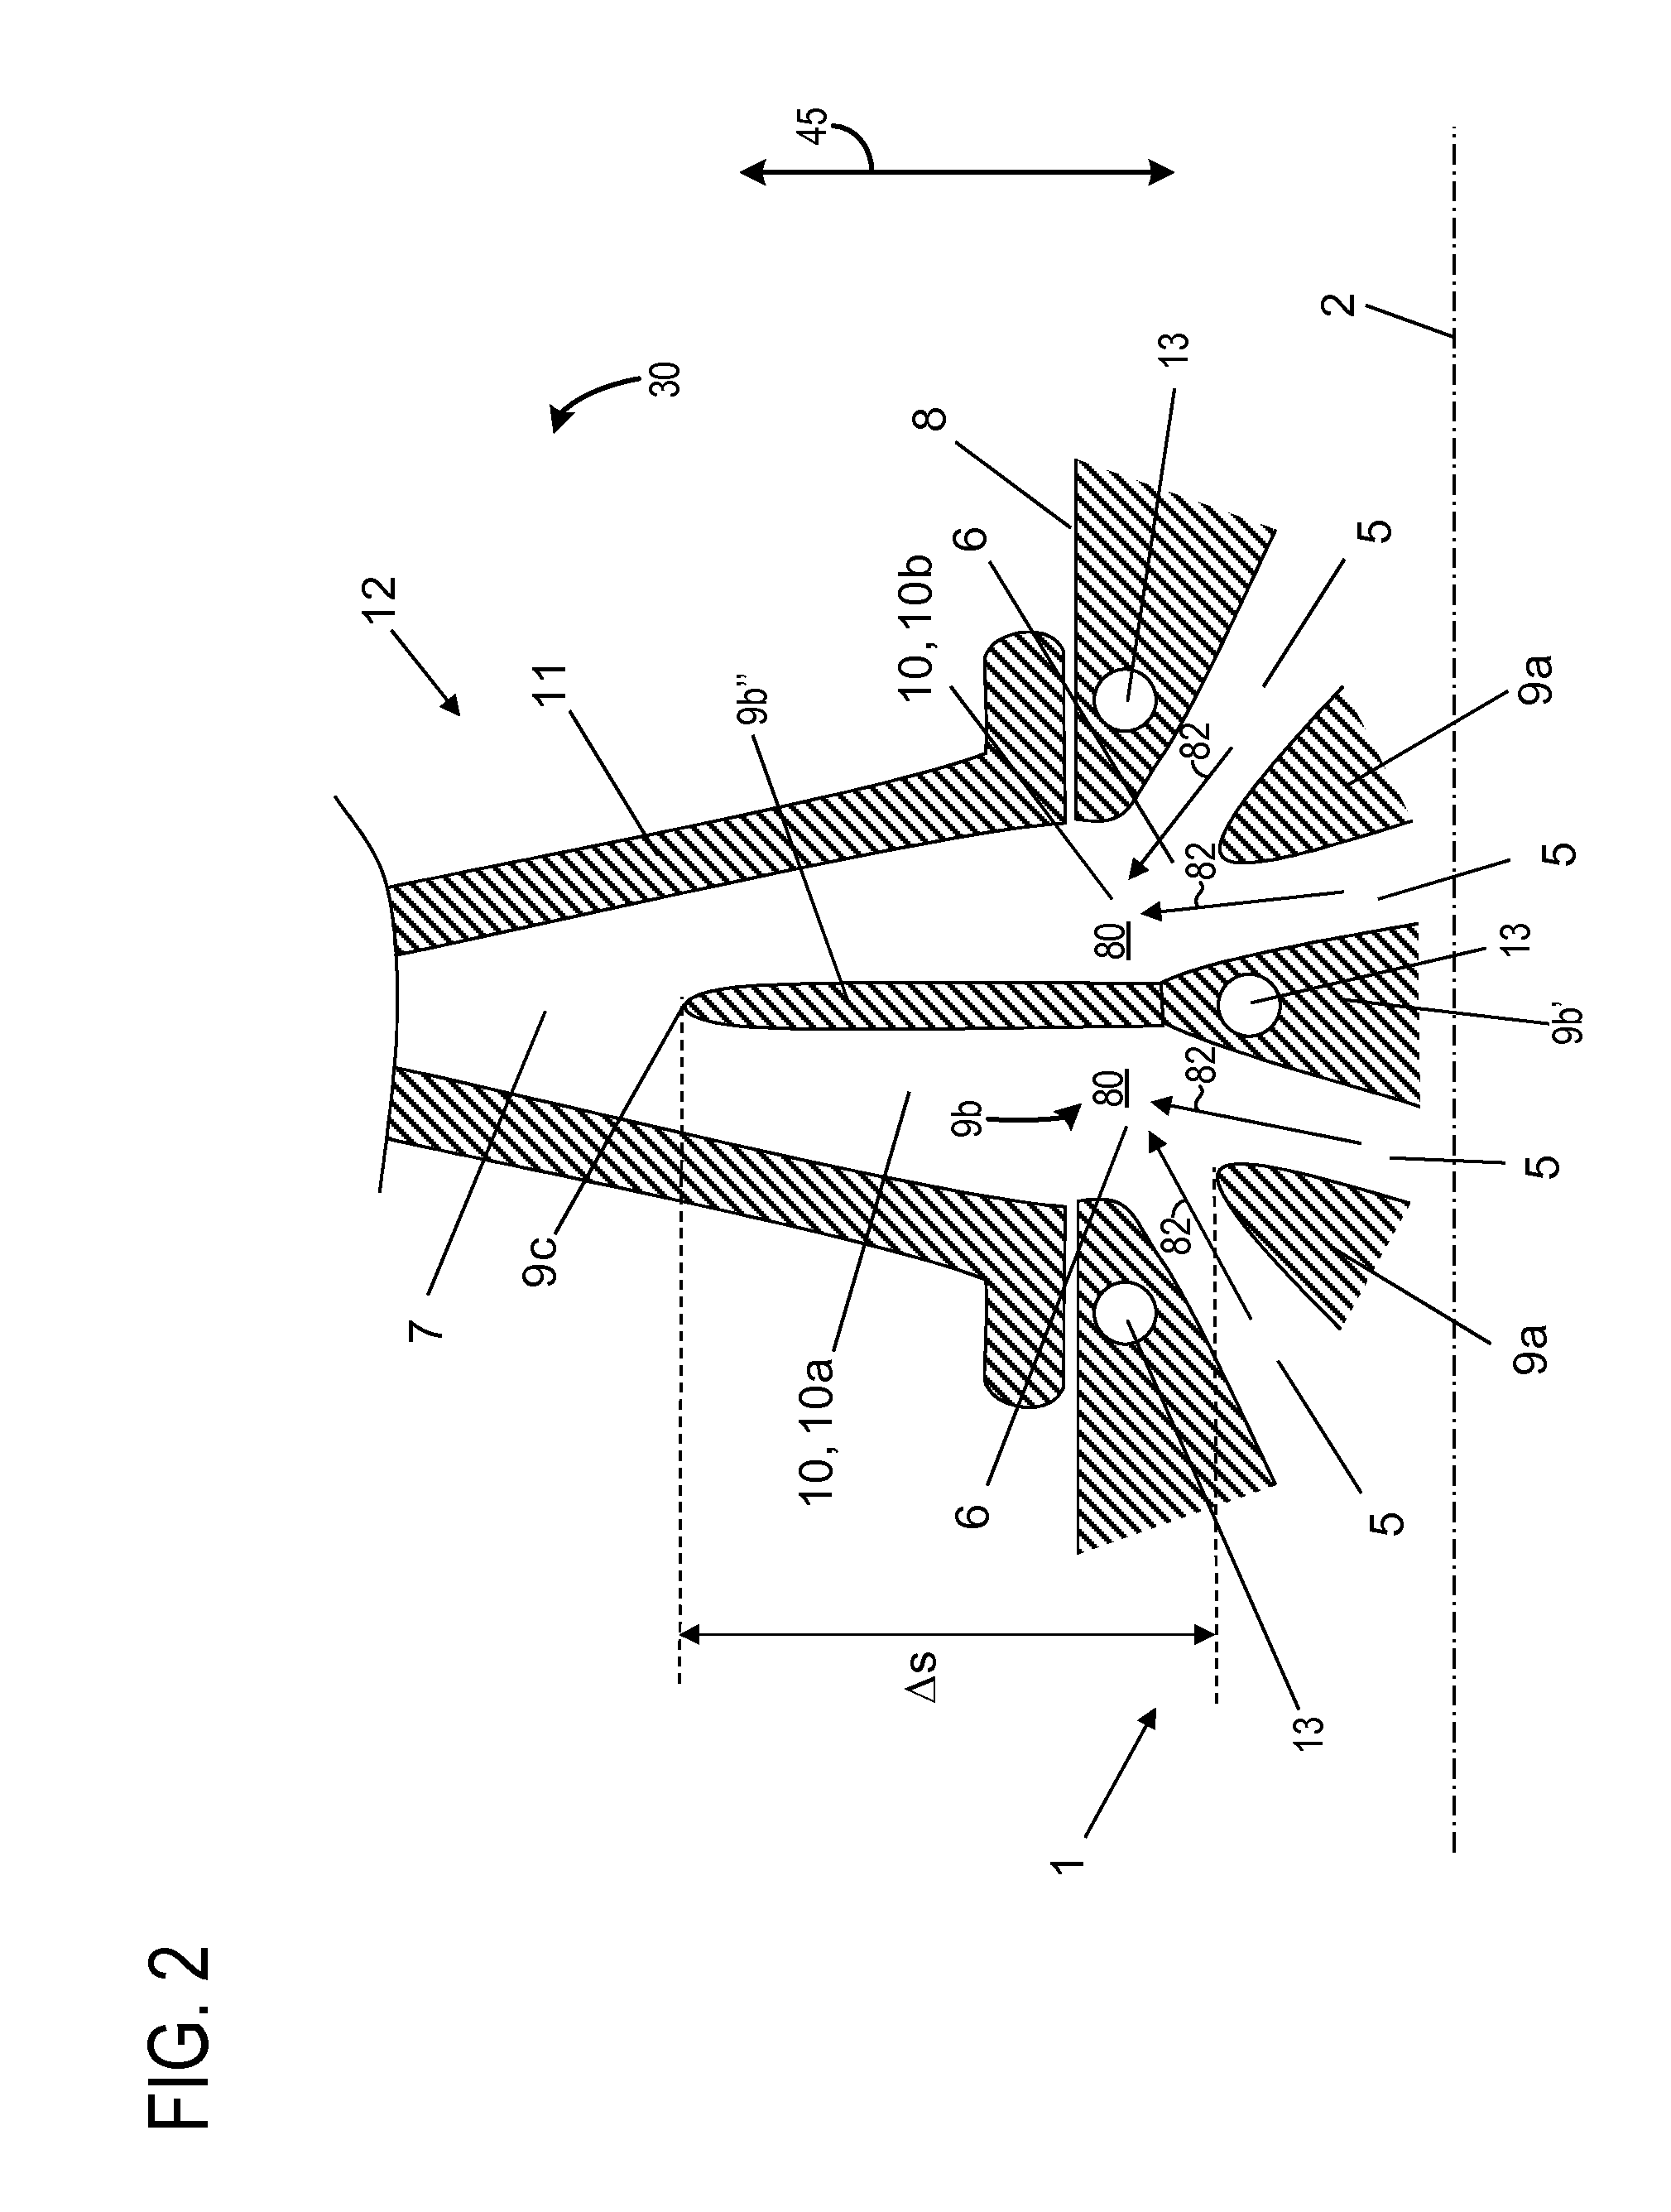 Liquid-cooled internal combustion engine with a partially integrated exhaust manifold